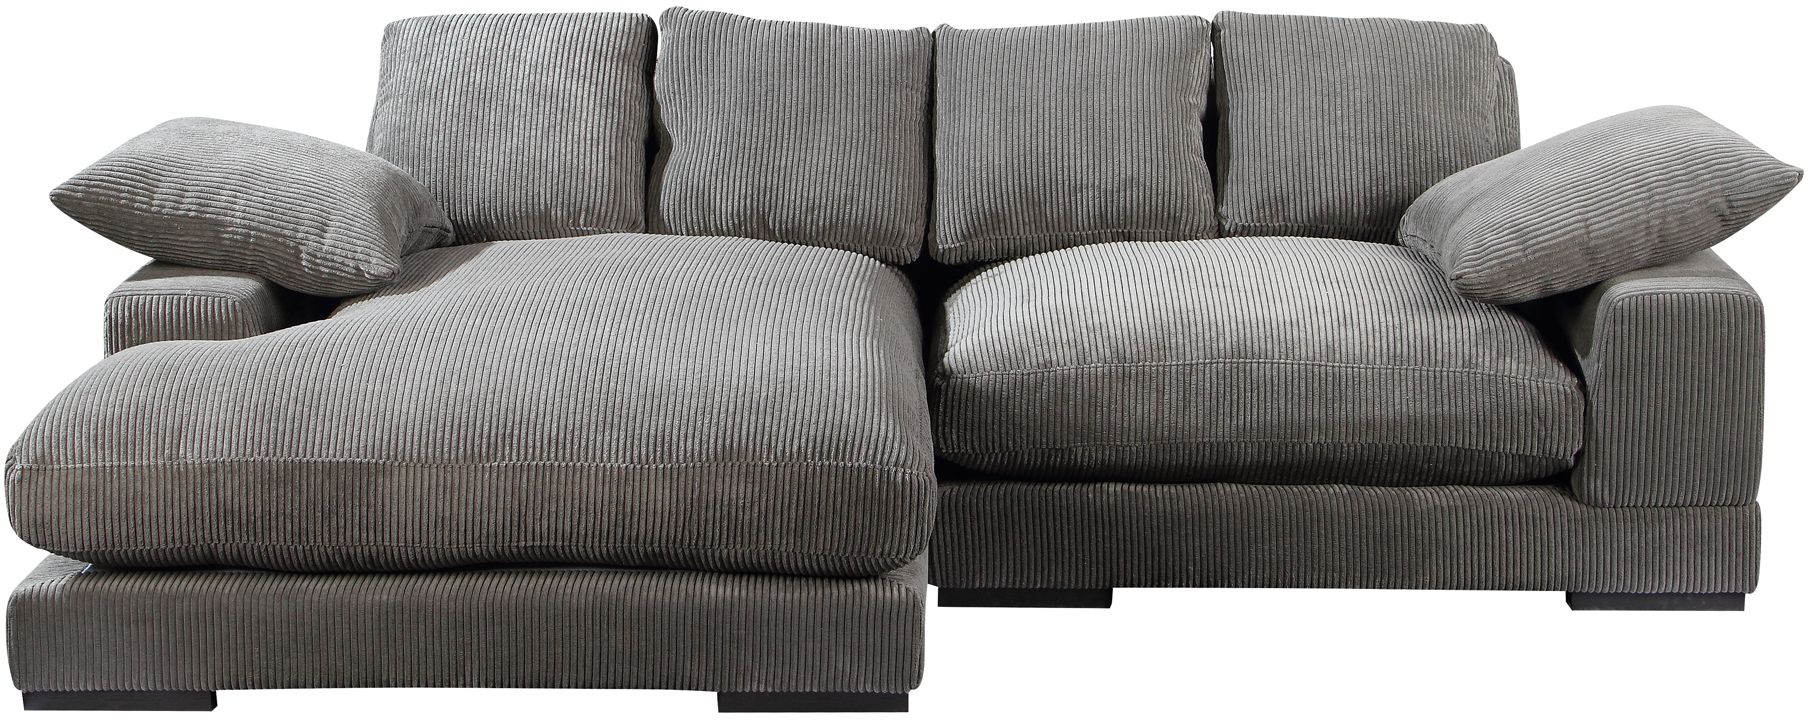 Plunge Sectional Charcoal, Wide Sectional Sofas Canada